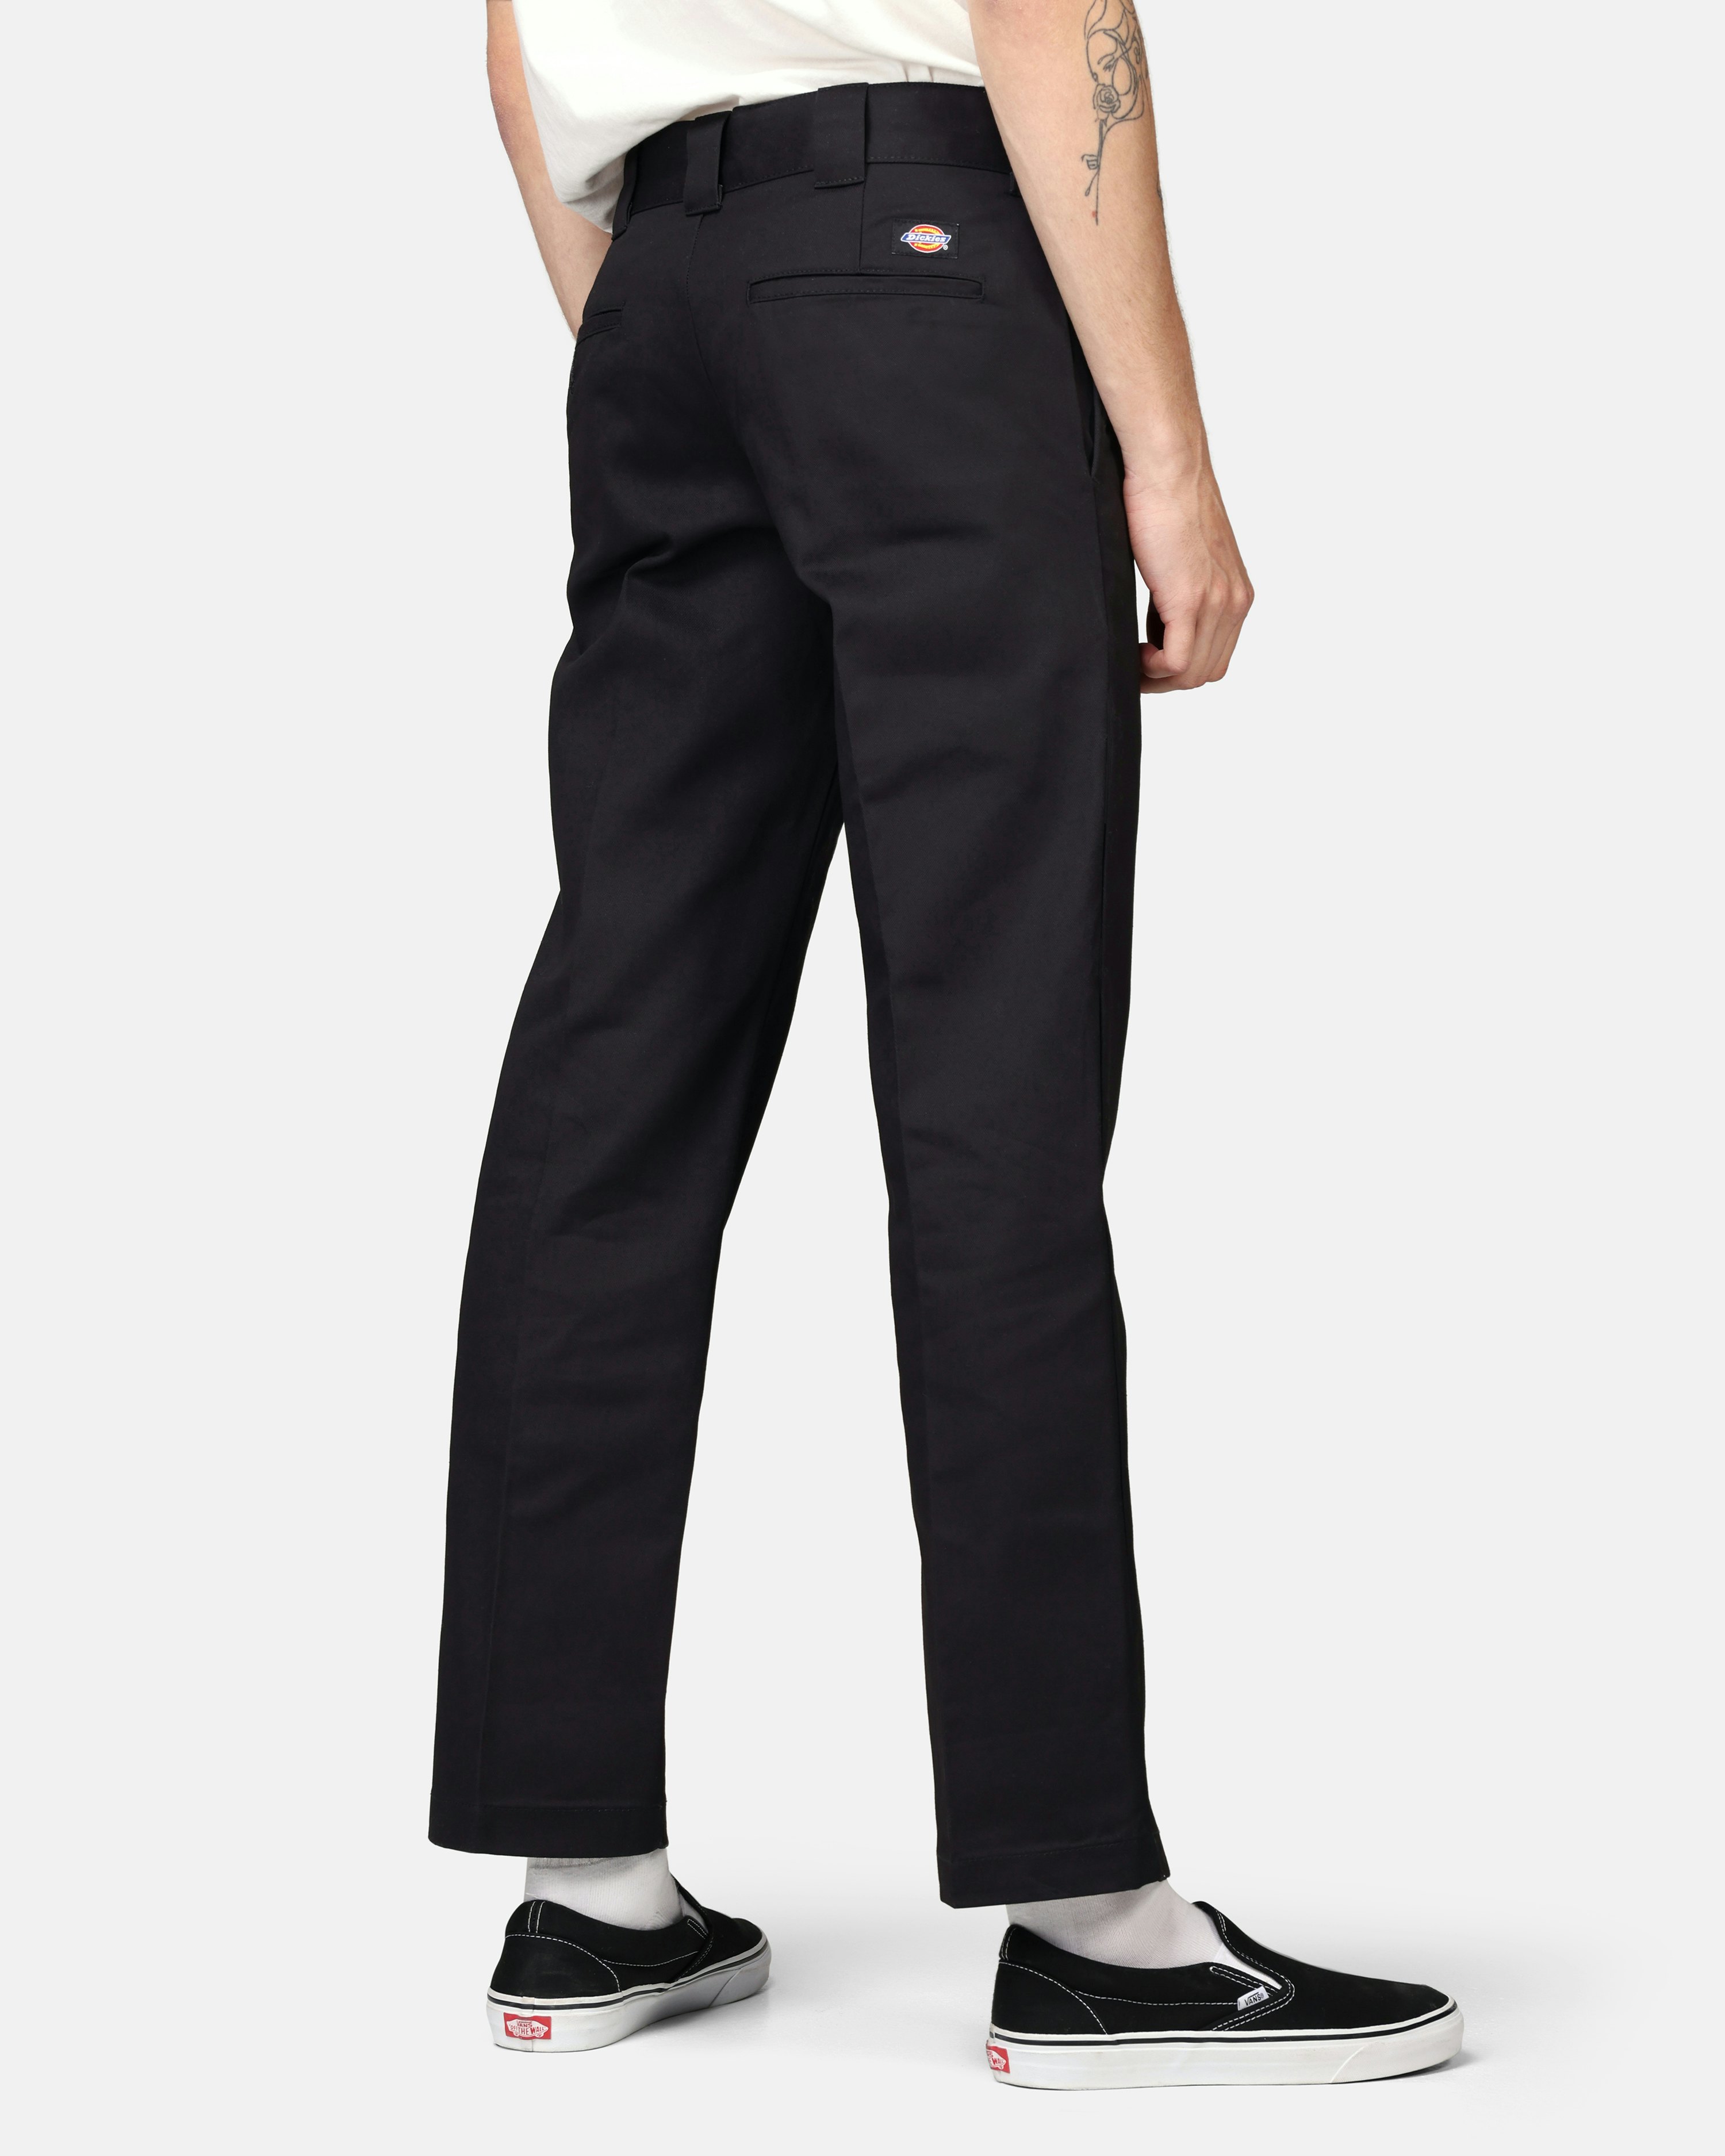 Dickies Pants 874, 873, 872: Your 2023 Fit Guide, Urban Industry